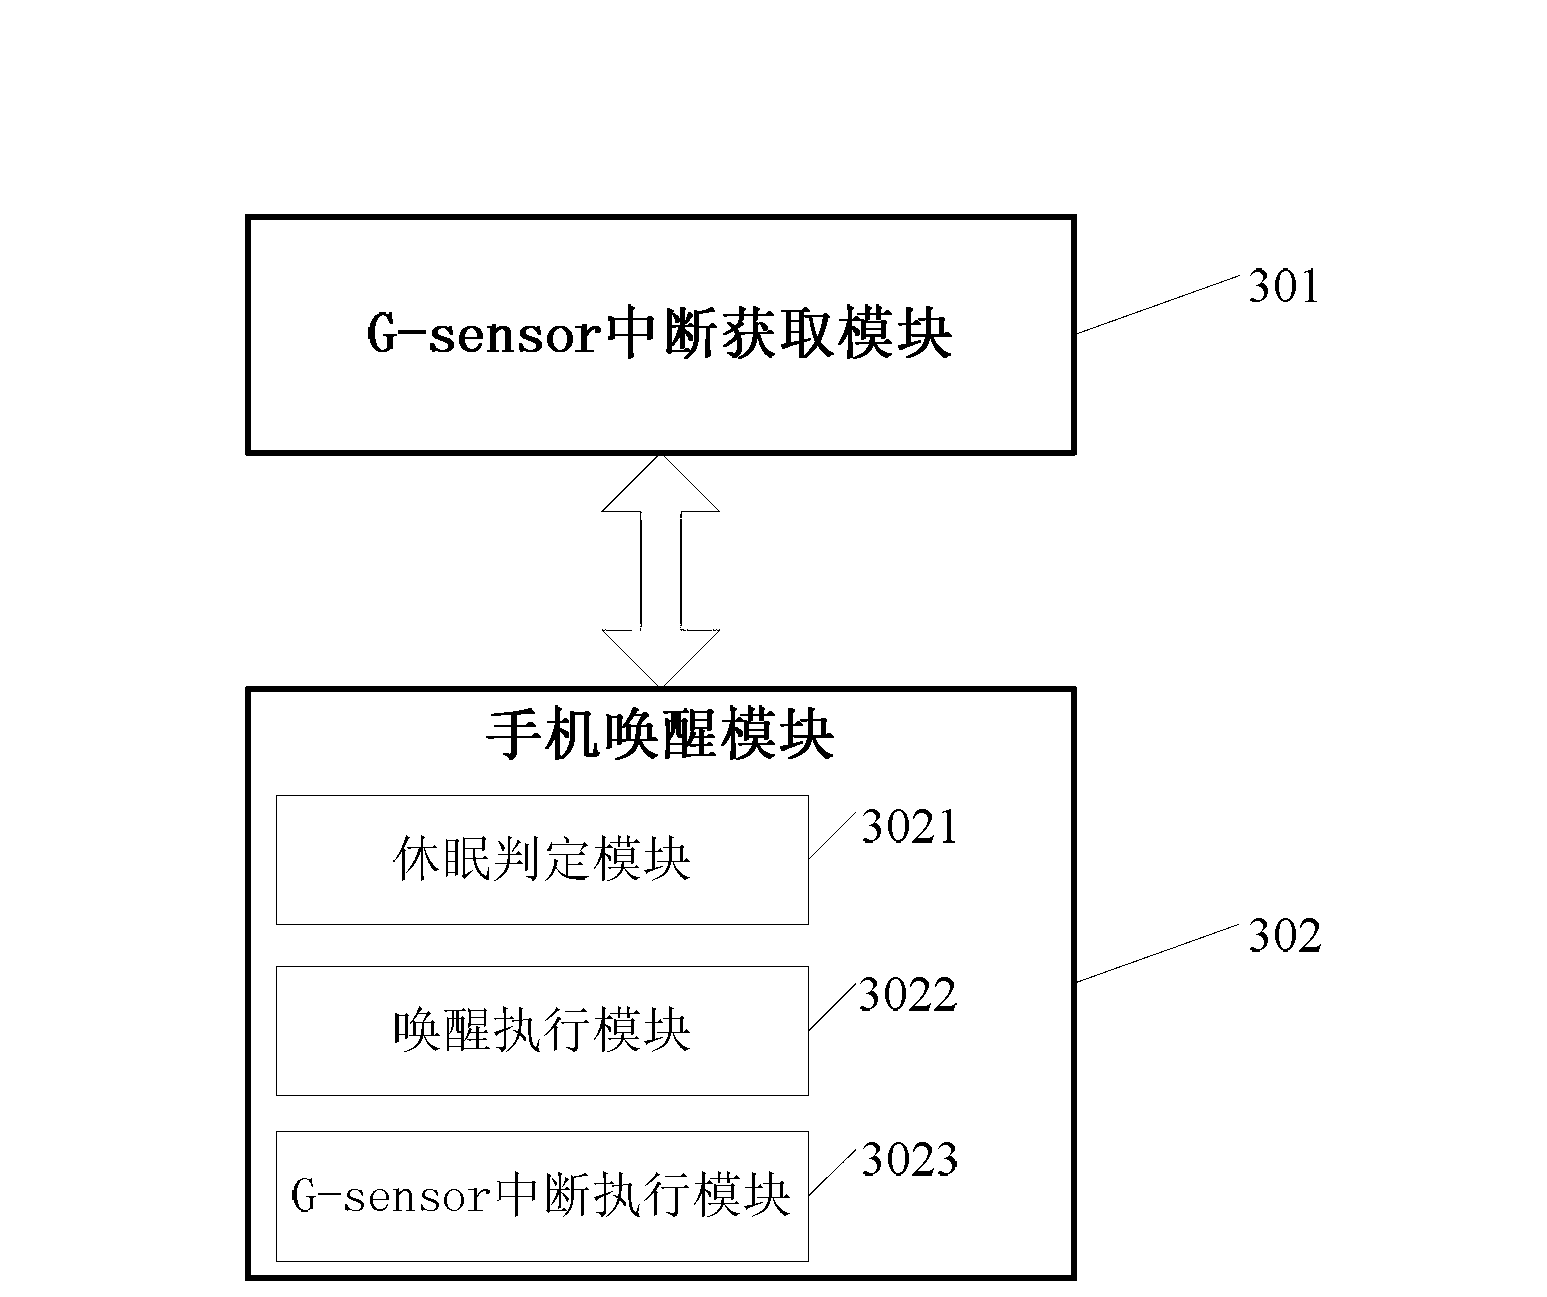 Method and system for awakening mobile phone